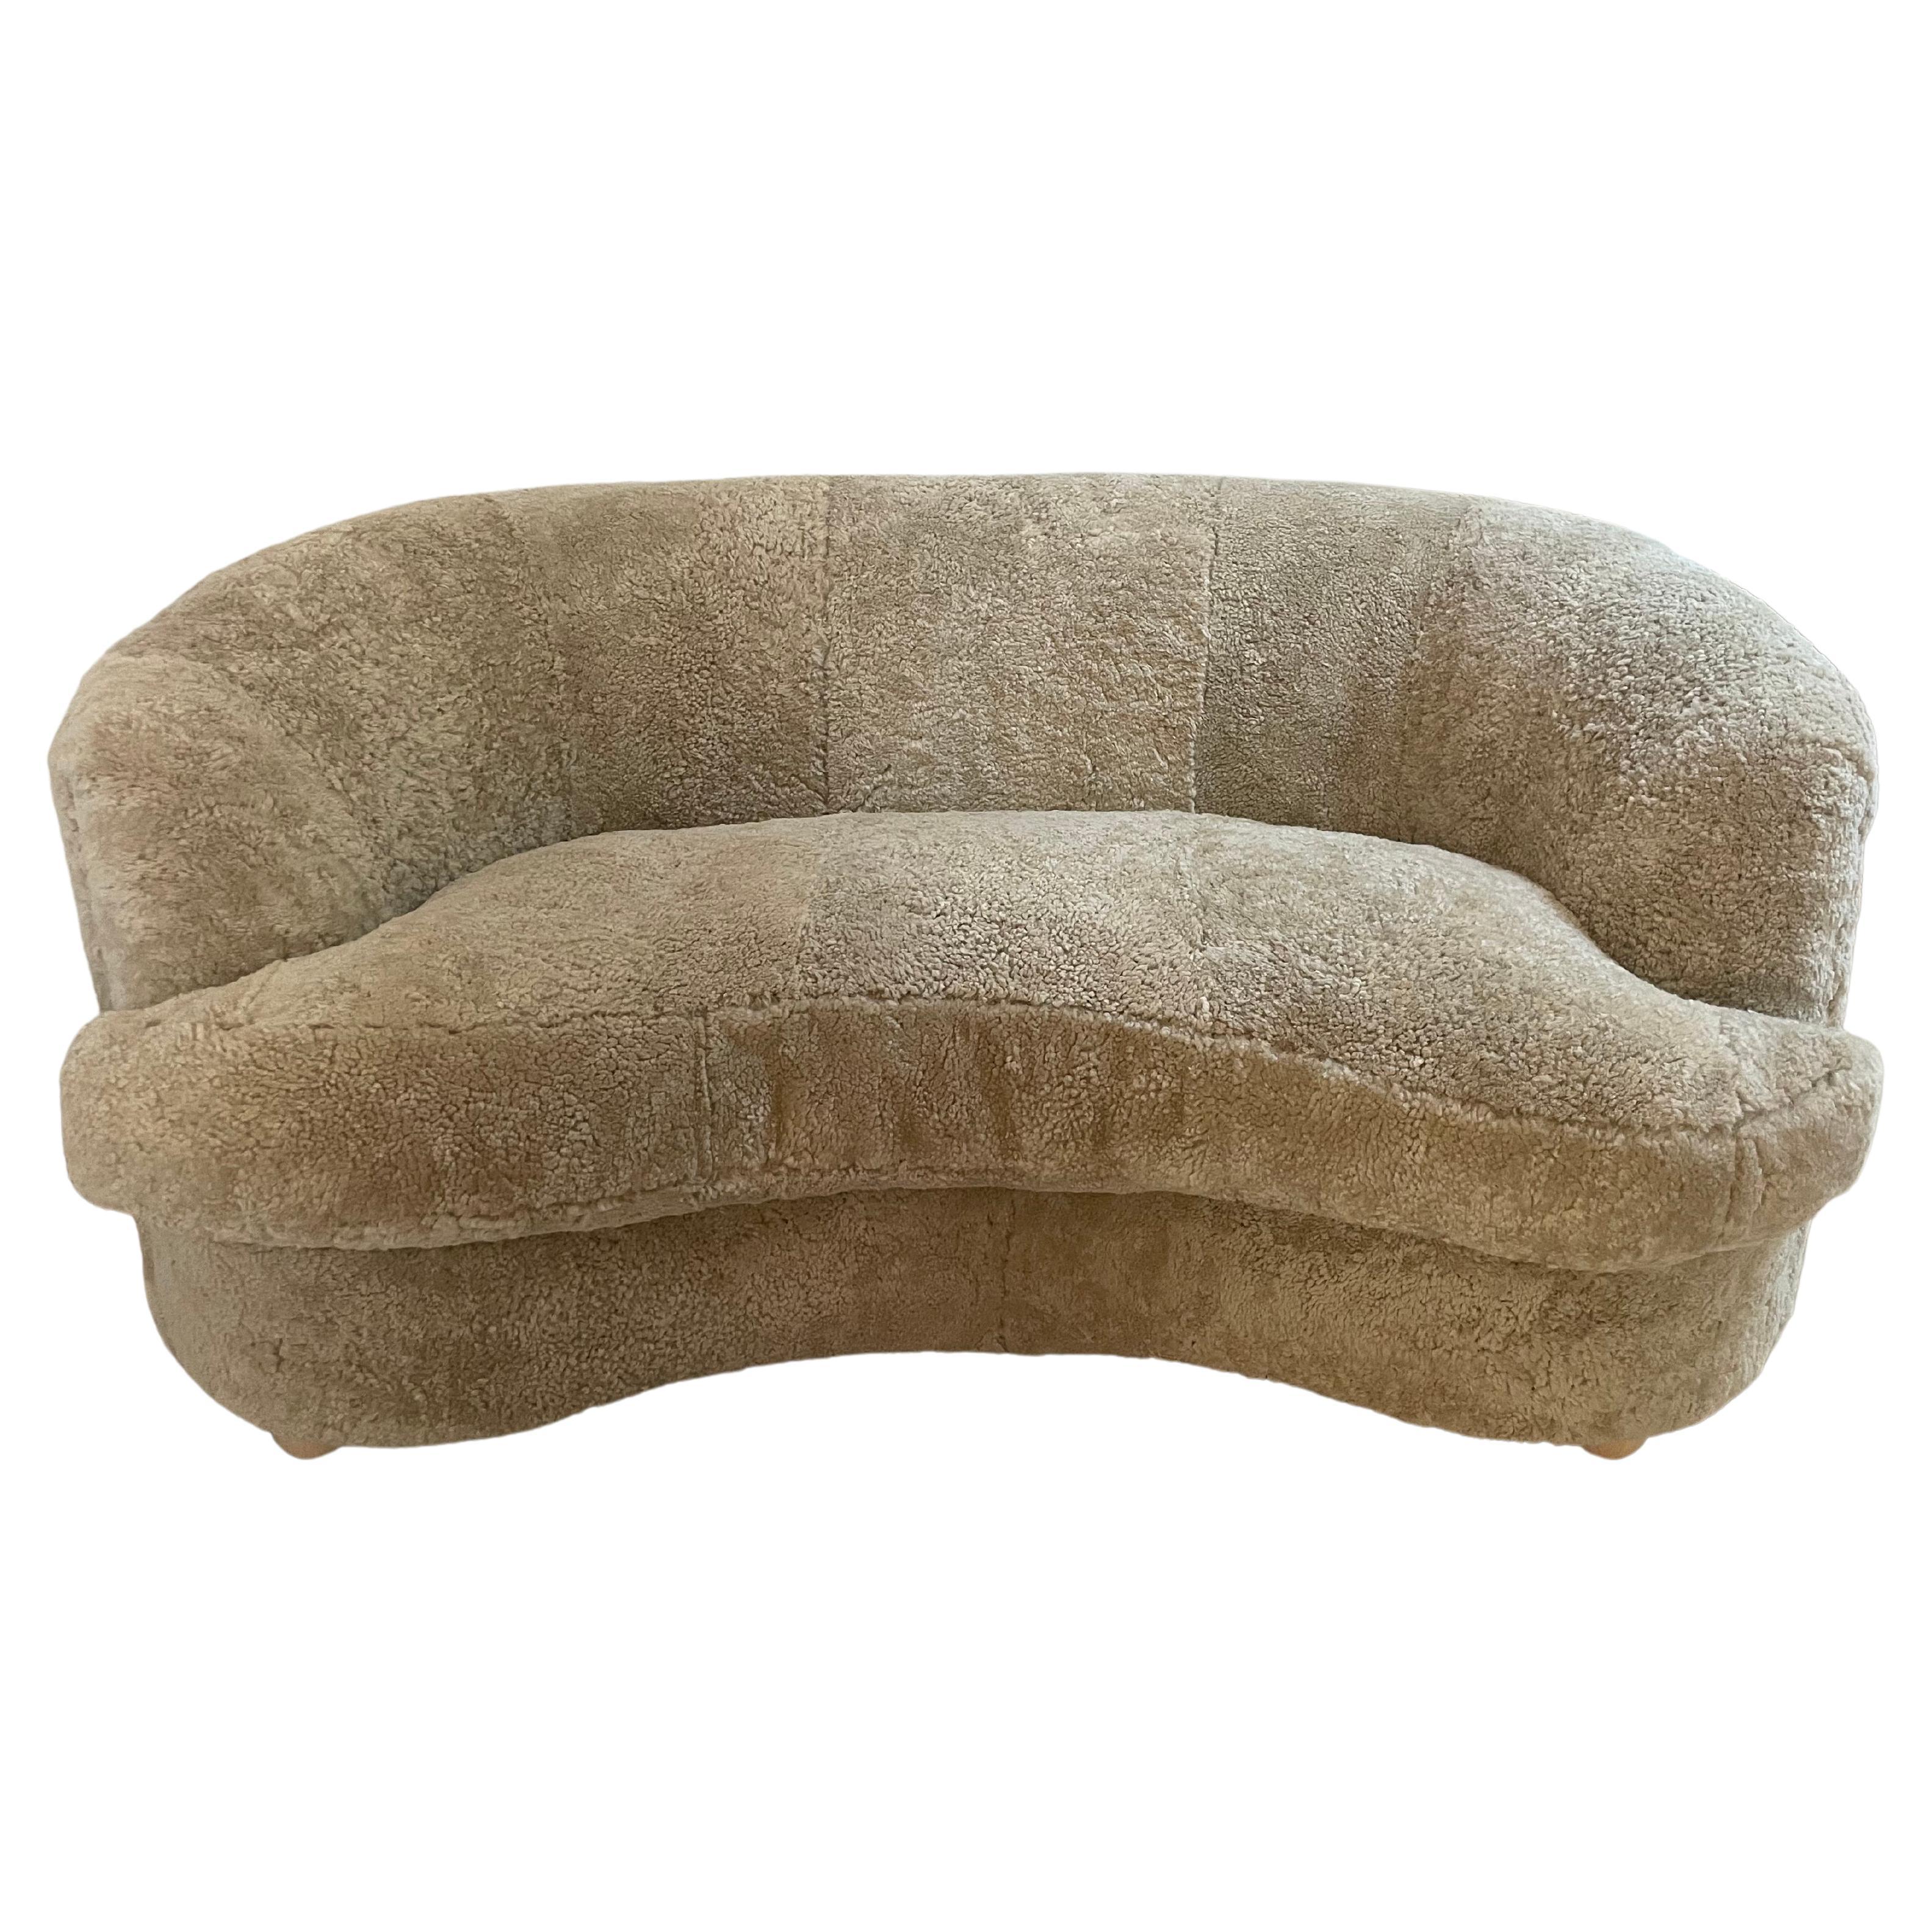 Curved 'Banana' Sofa in Amber-toned Brown Shearling  For Sale